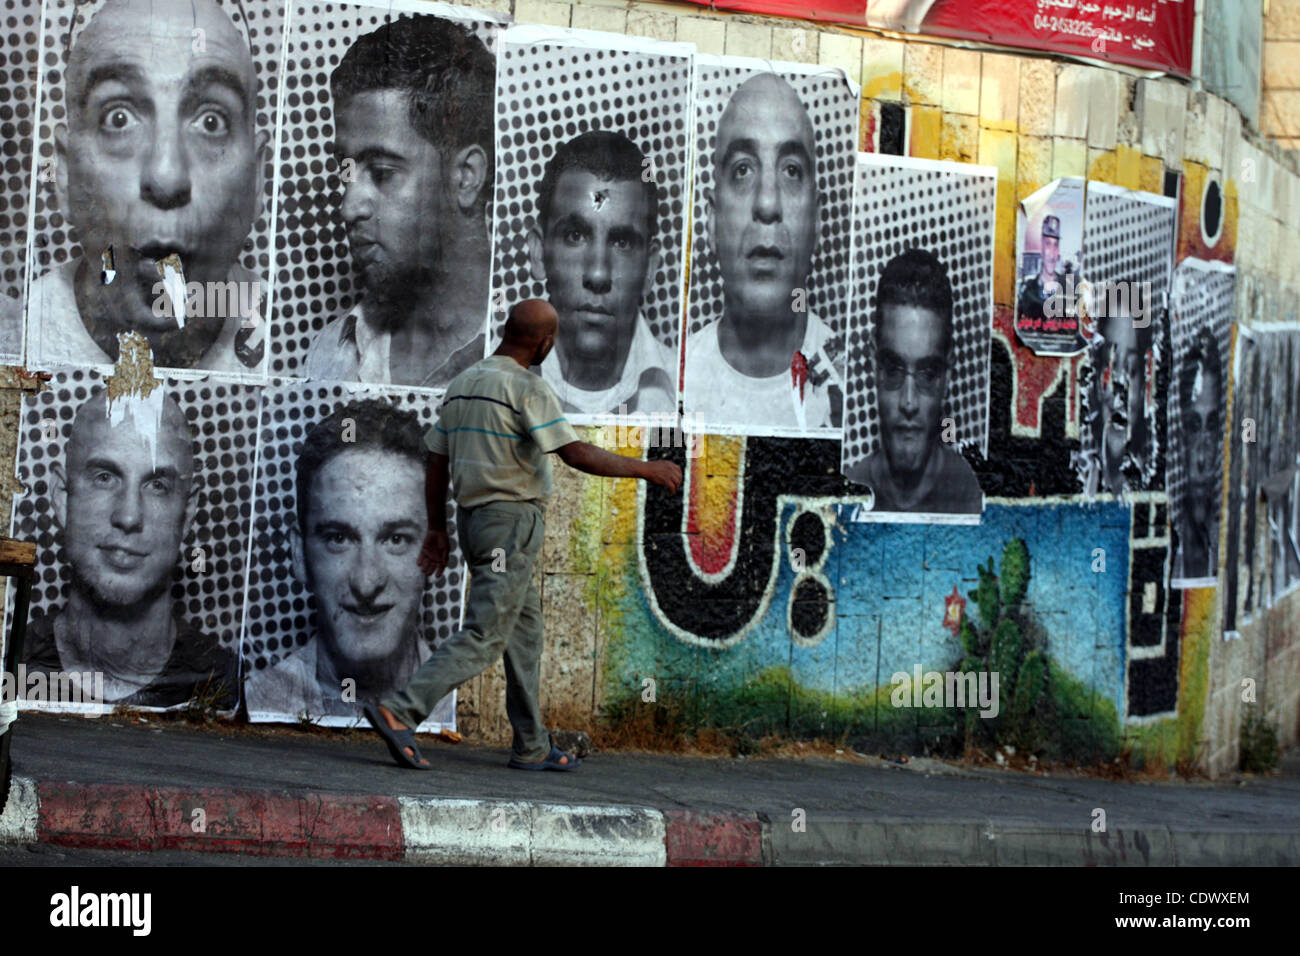 A Palestinian man walks past large black and white photographs taken by French street artist JR of Palestinians, on September 6, 2011, in the West Bank city of Ramallah. JR's project entails having Palestinian and Israeli portraits taken which are then printed and pasted onto walls In Israel and the Stock Photo